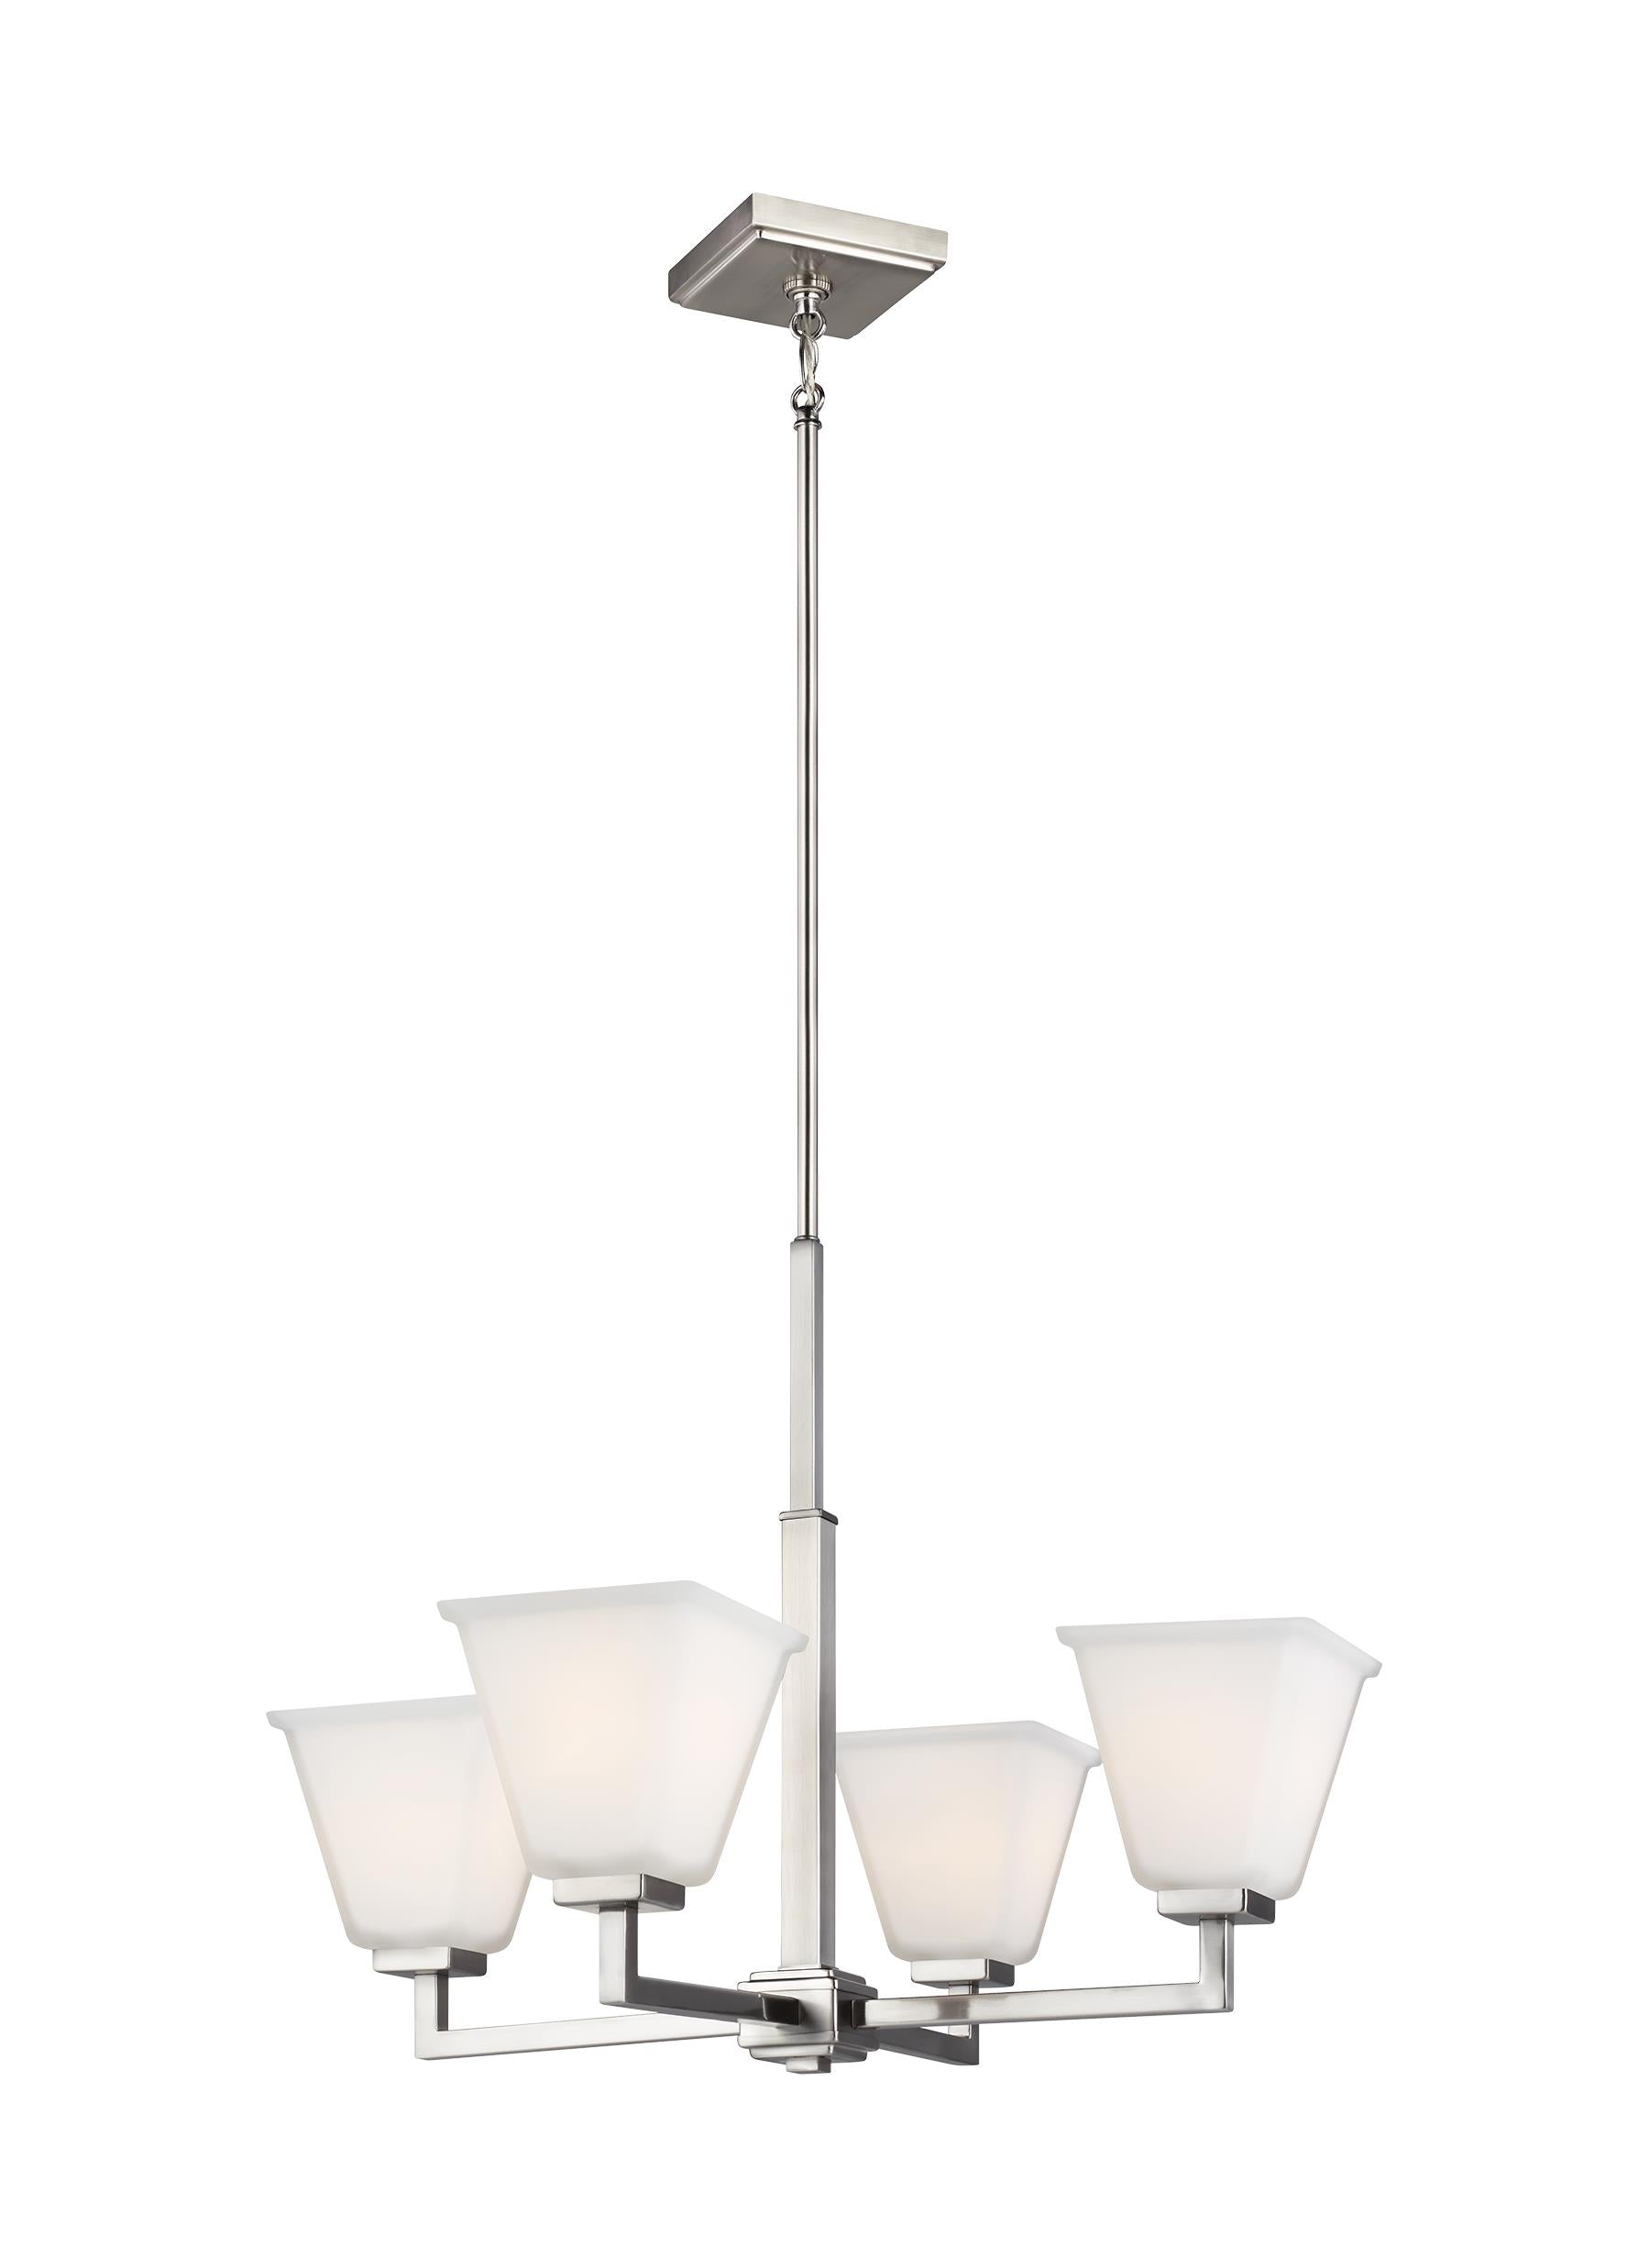 Ellis Harper classic 4-light indoor dimmable ceiling chandelier pendant light in brushed nickel silver finish with etched ...